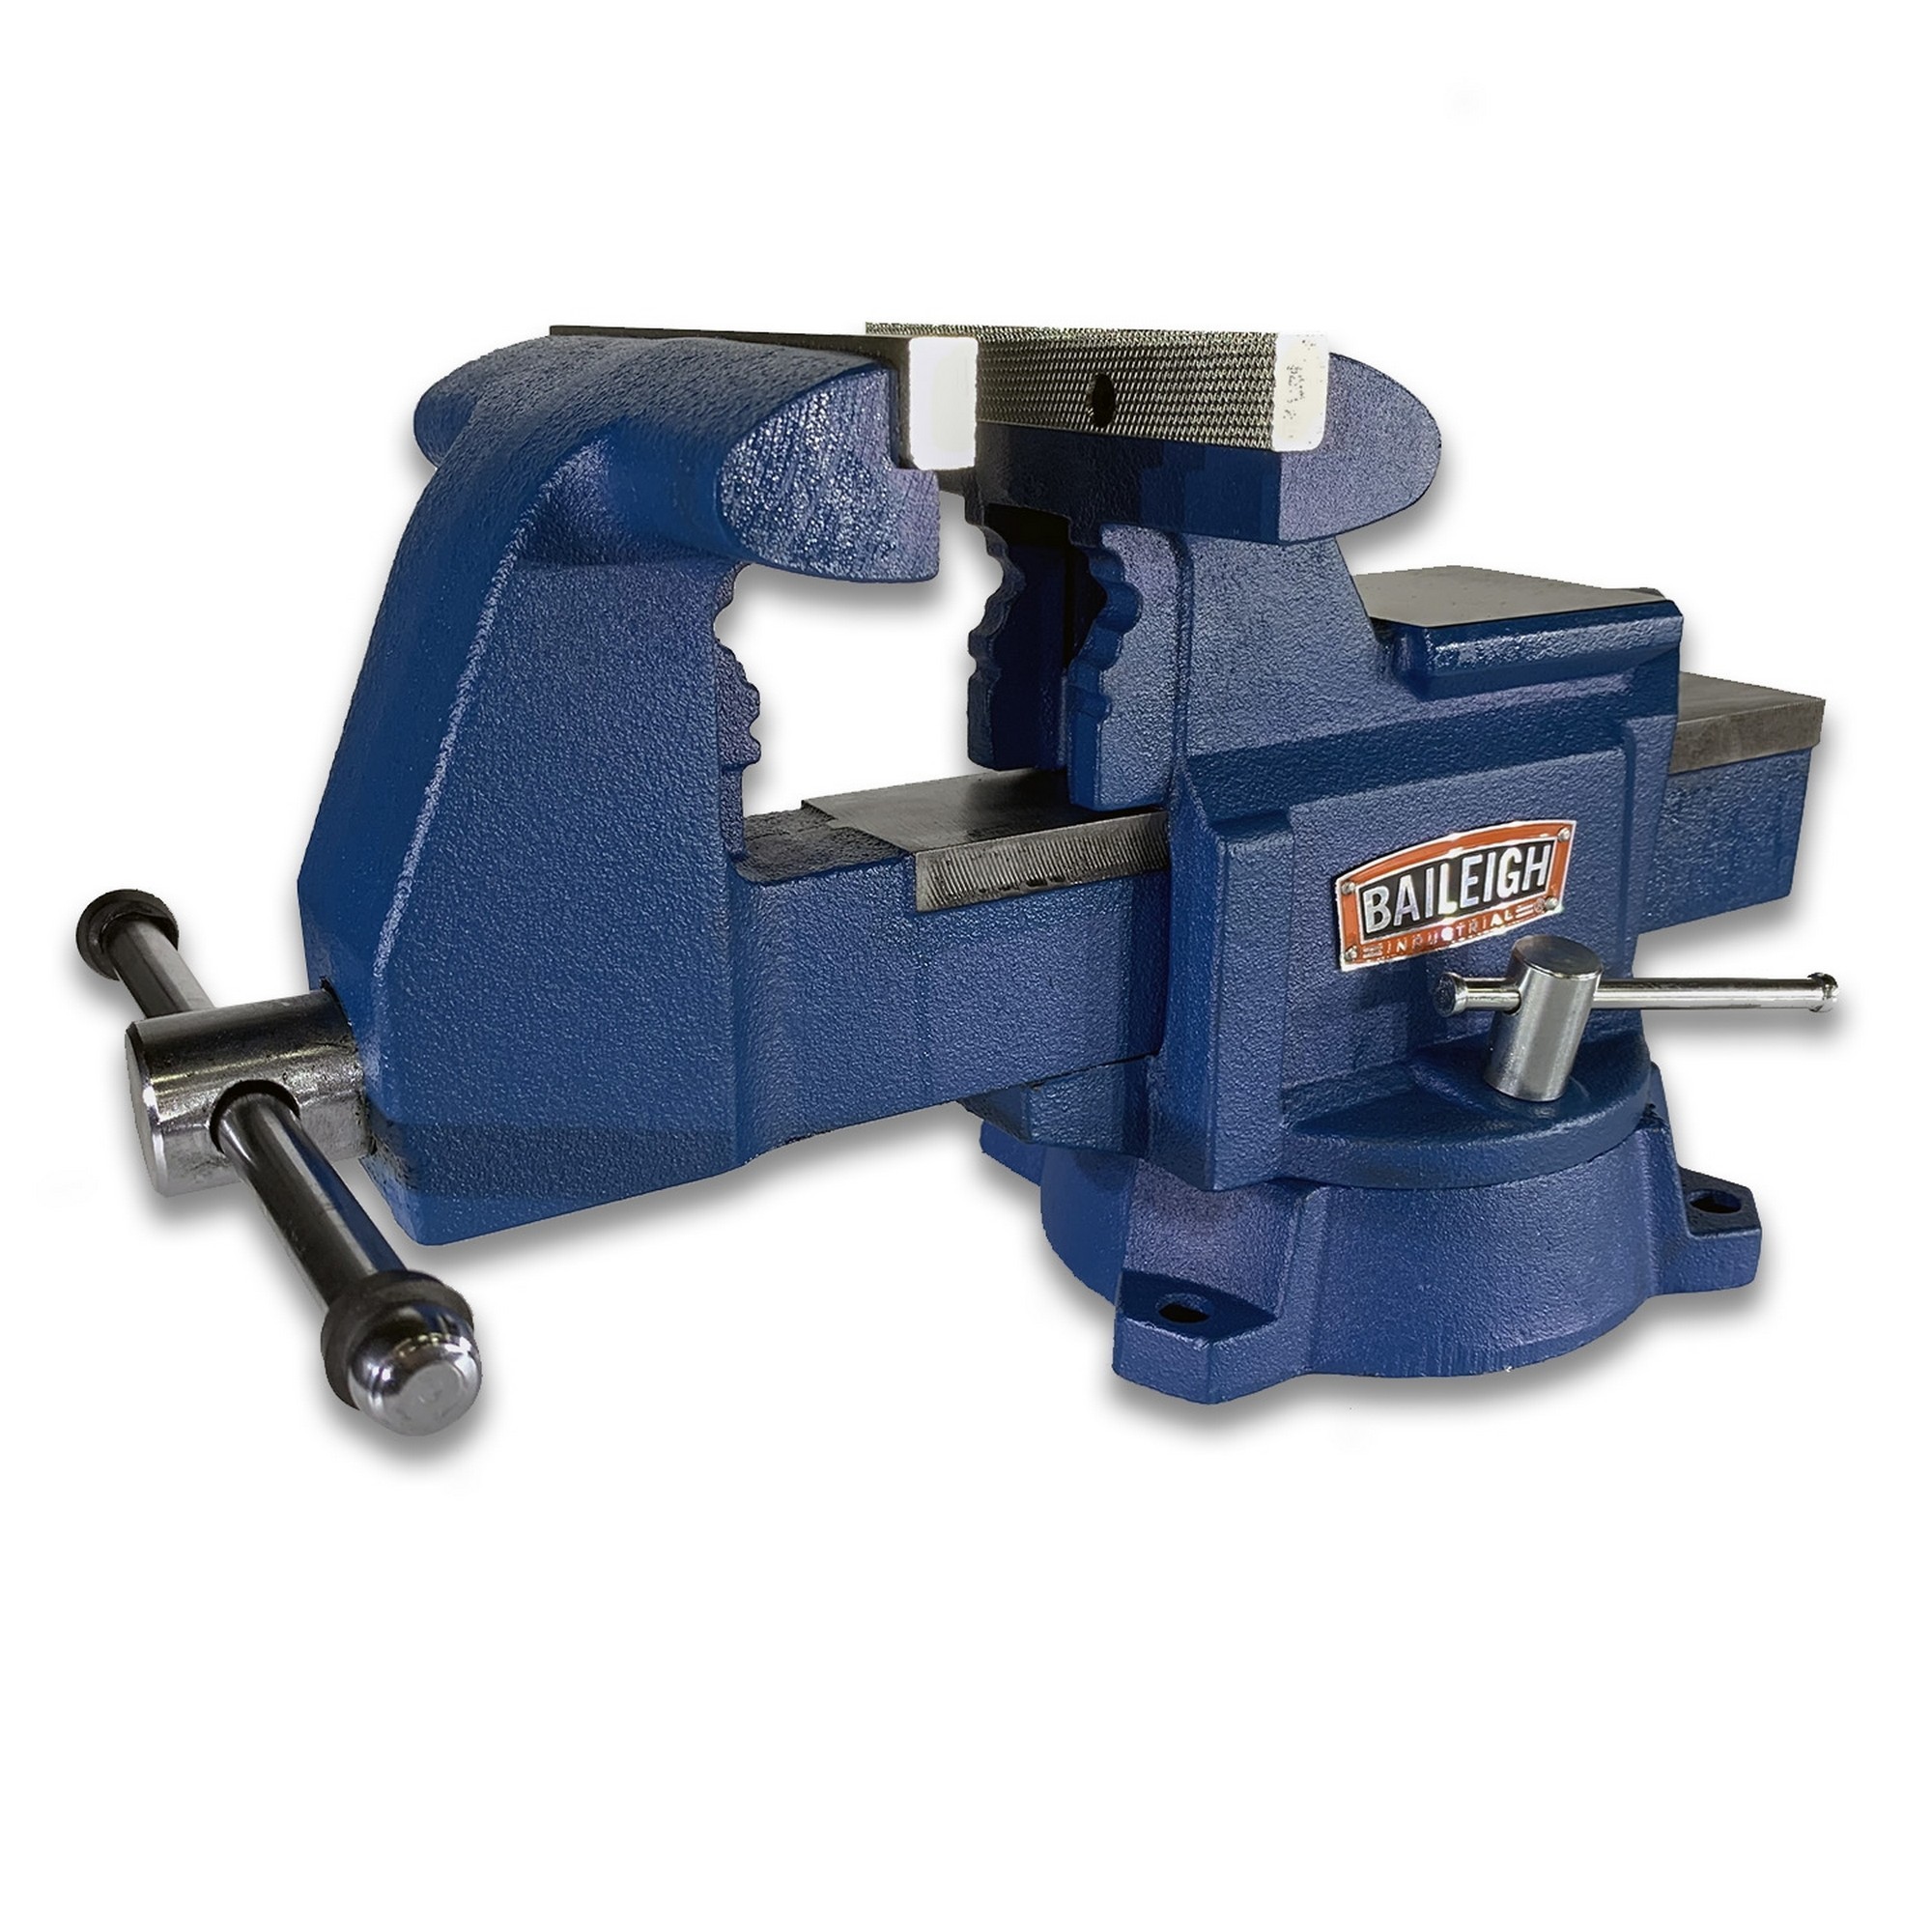 Baileigh, Vise, Jaw Width 5 in, Jaw Capacity 6 in, Model BV-5I